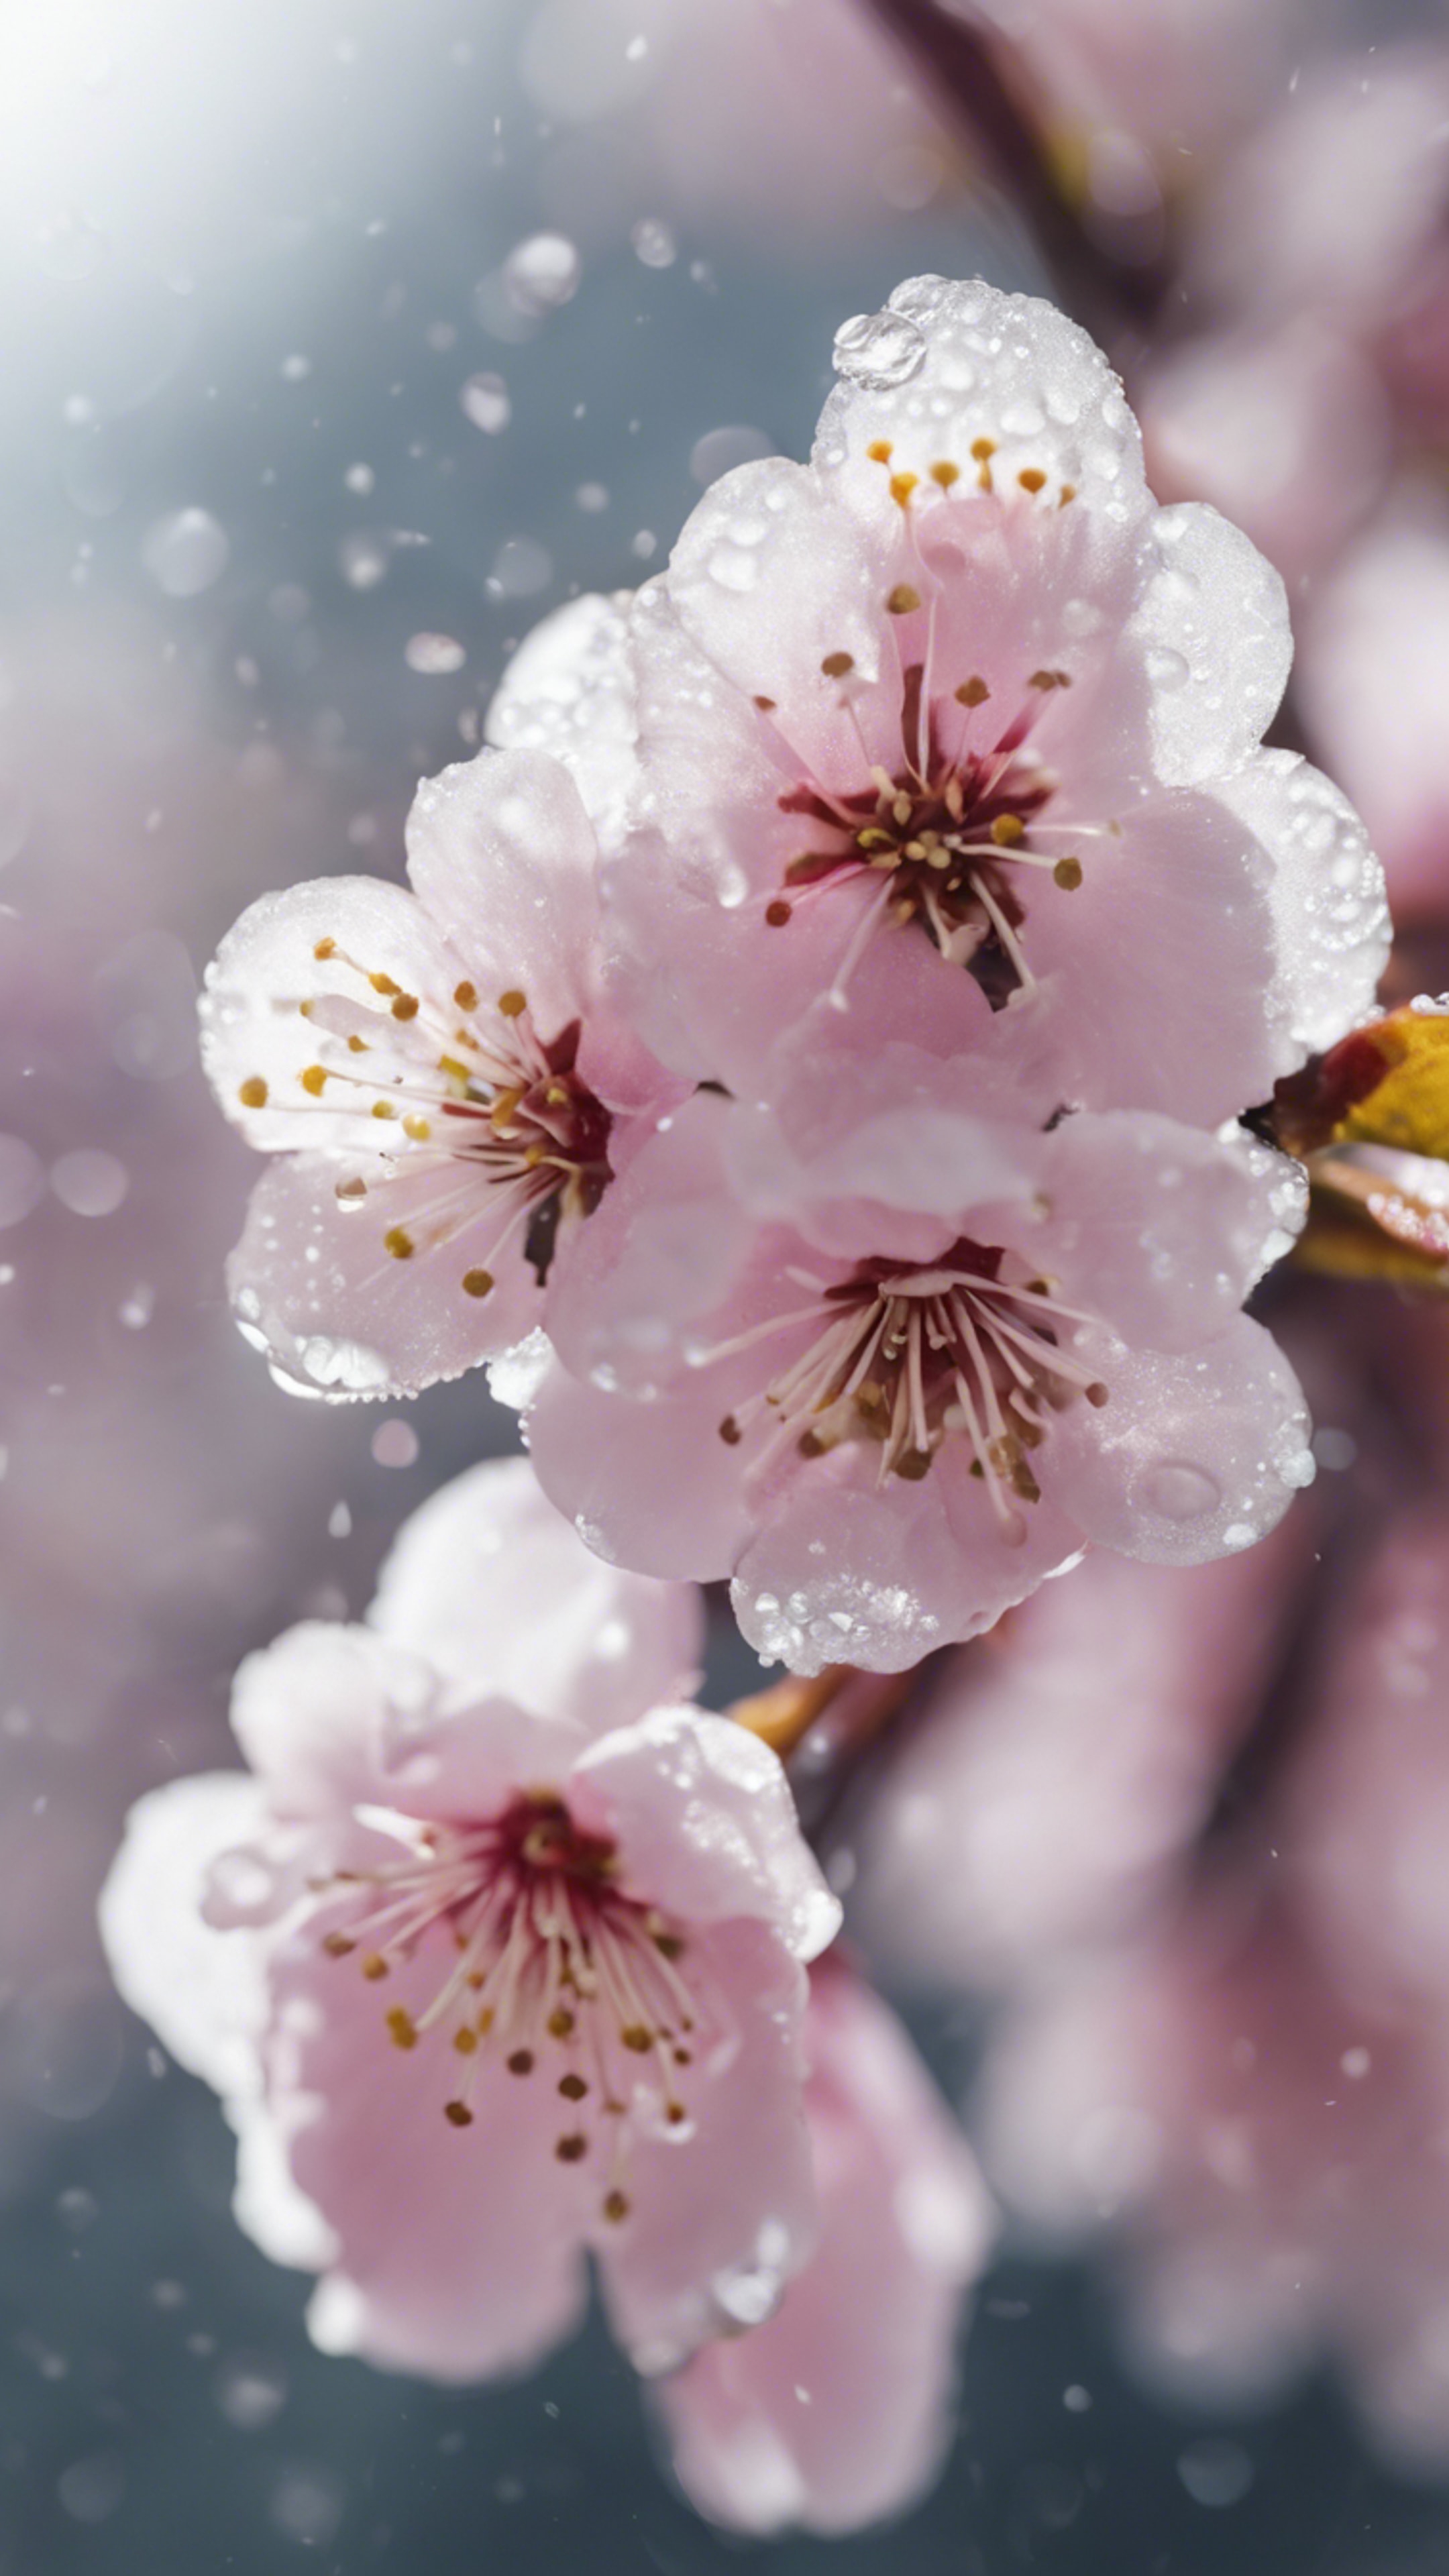 A closeup image of a freshly blooming cherry blossom, speckled with dew drops. کاغذ دیواری[d7e9cc65cc424f509aa2]